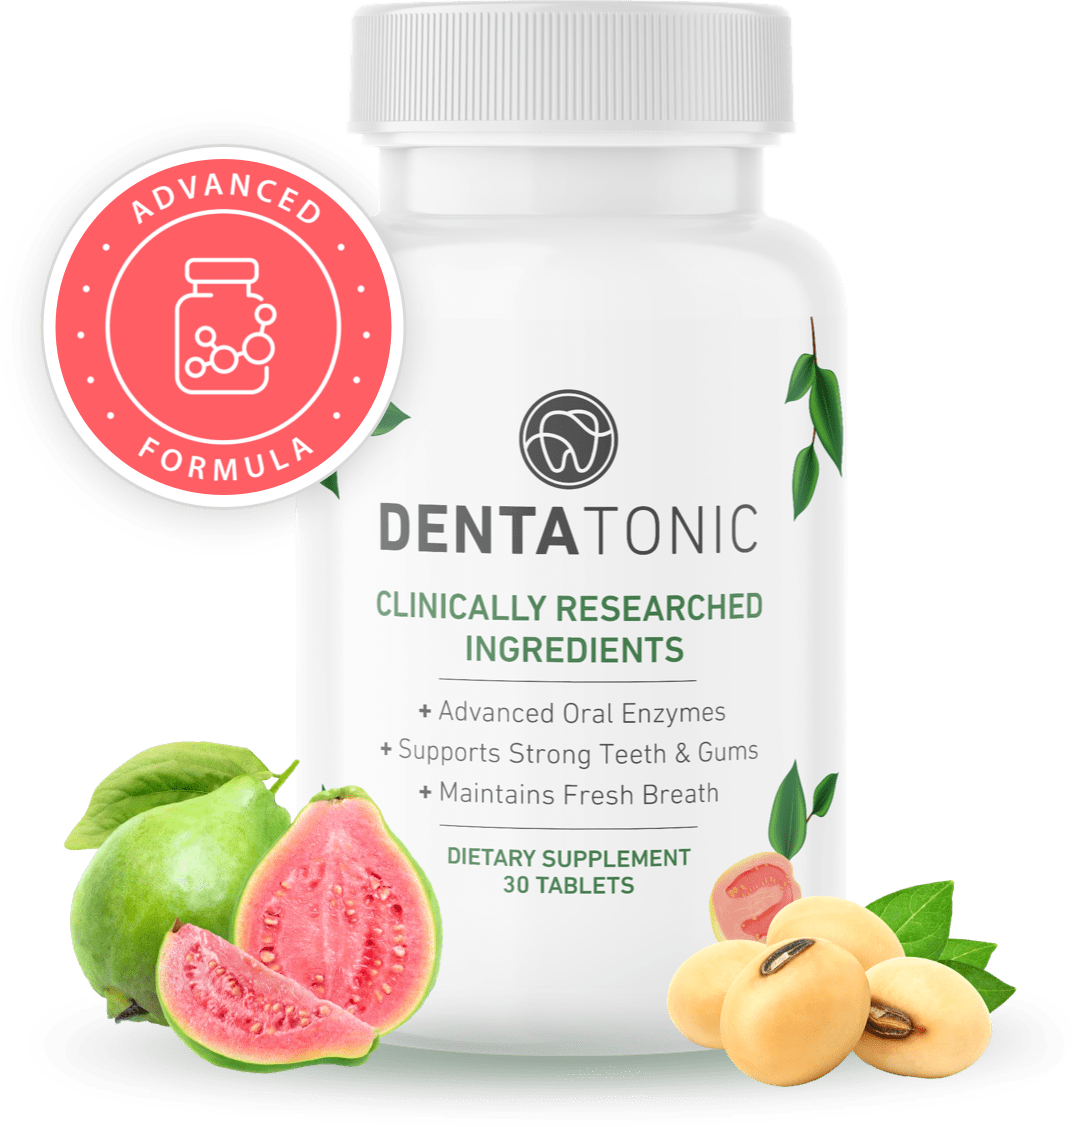 * DENTATONIC

CLINICALLY RESEARCHED
INGREDIENTS

DIETARY SUPPLEMENT

30 TABLETS 2